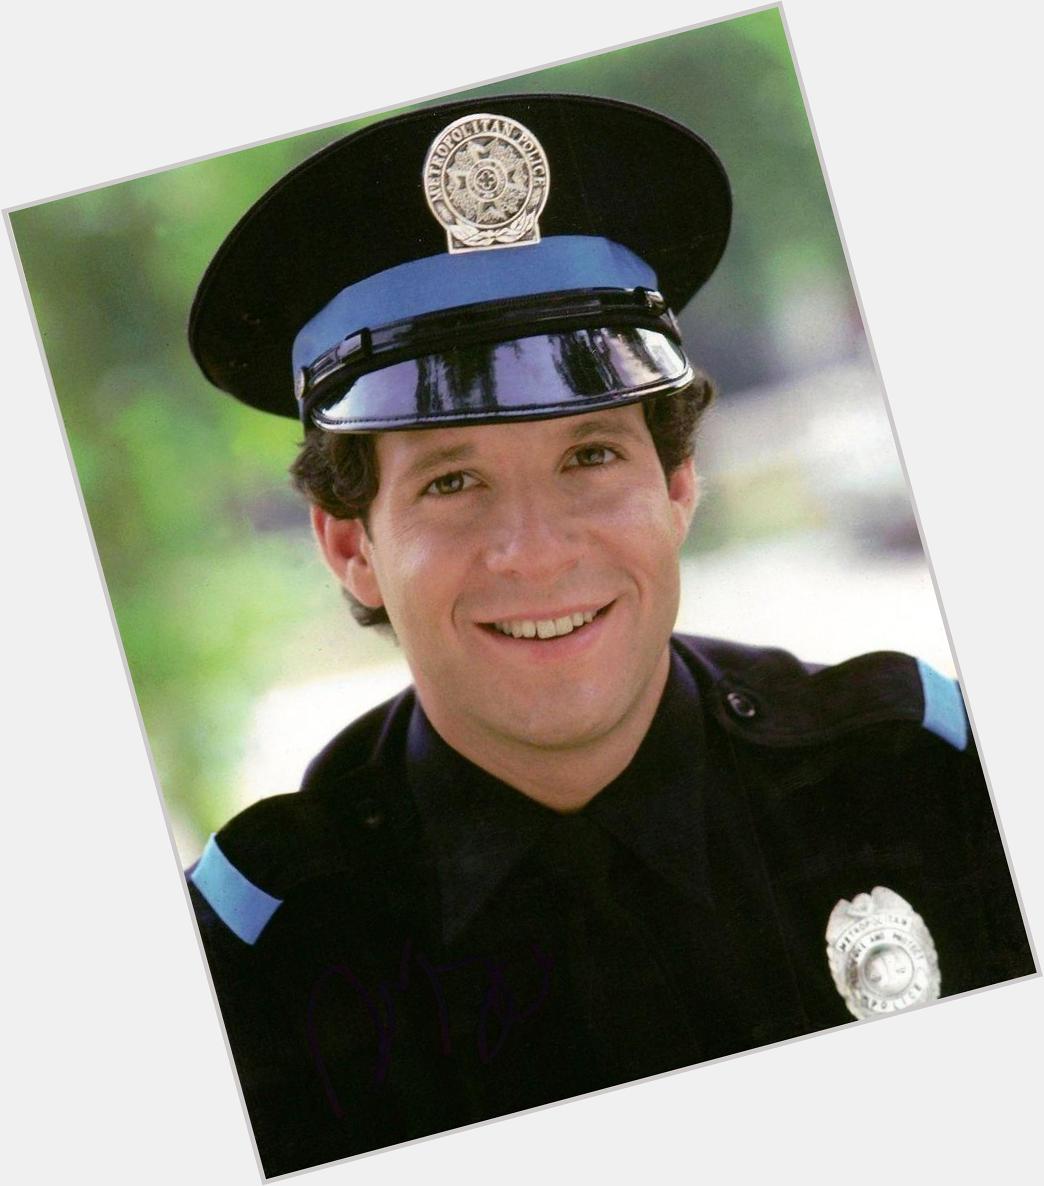 Happy Birthday to Steve Guttenberg, who turns 57 today! 